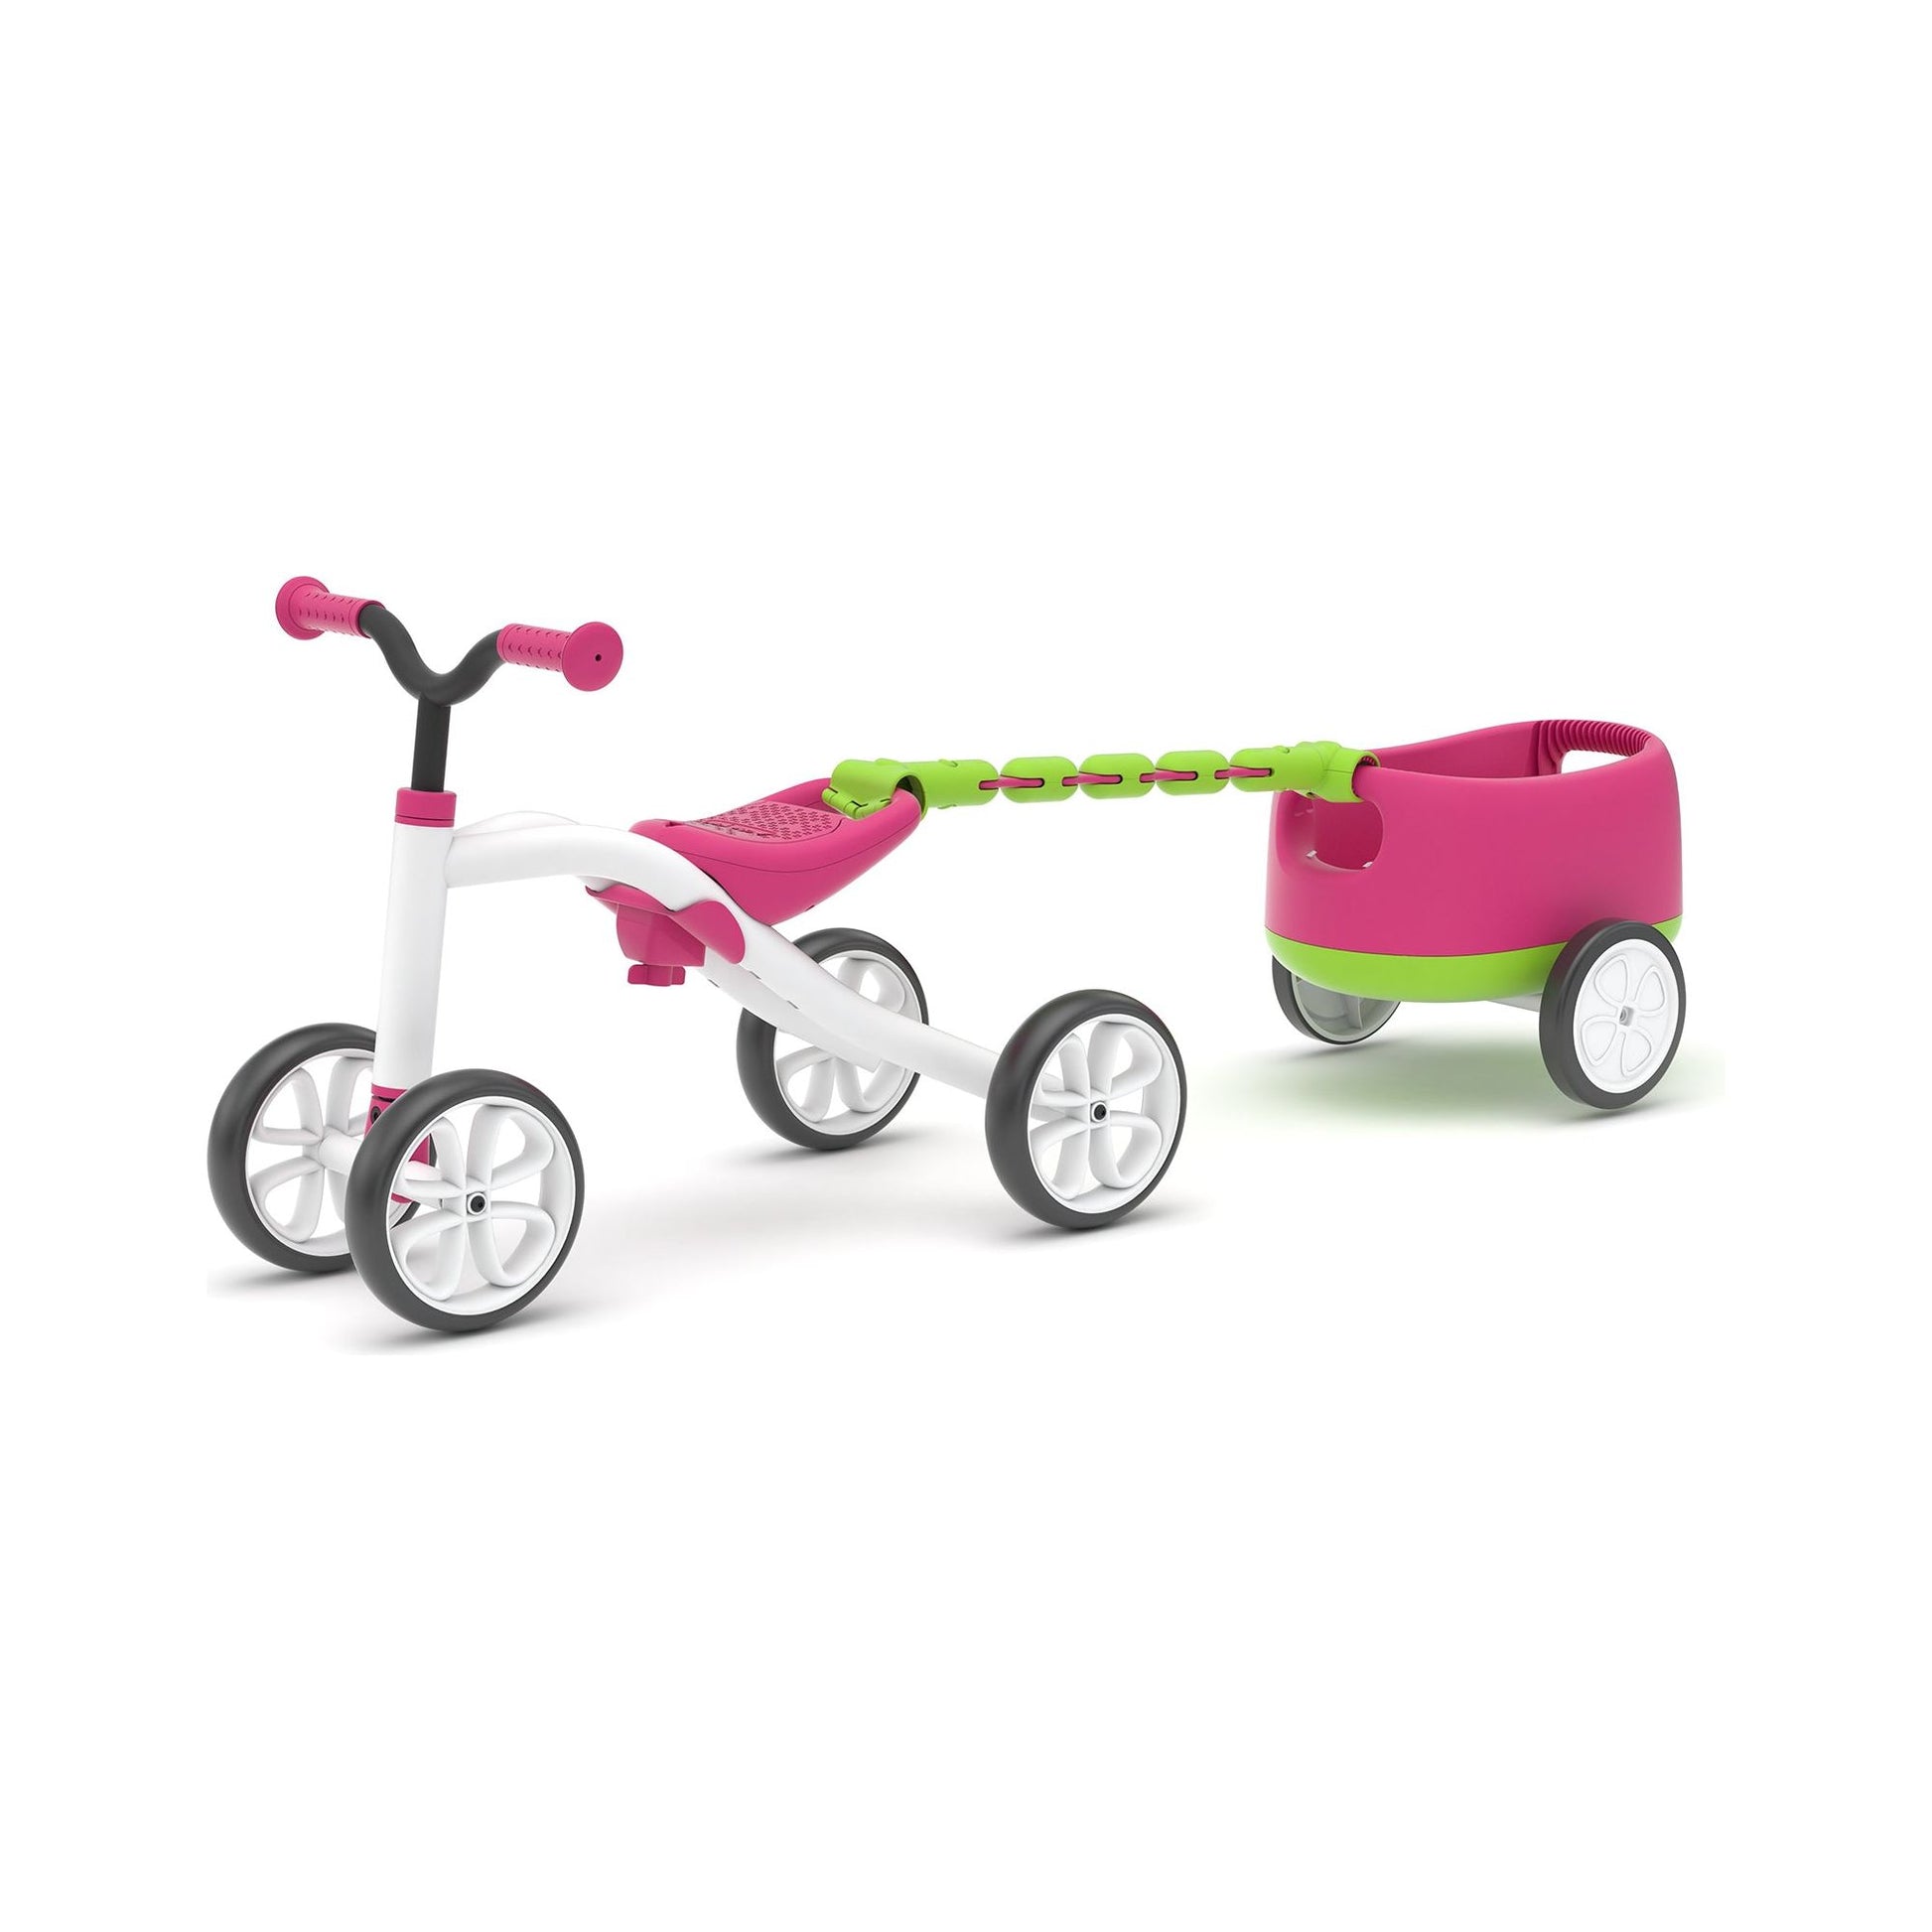 Chillafish Quadie and Trailie Ride-On Pink front left